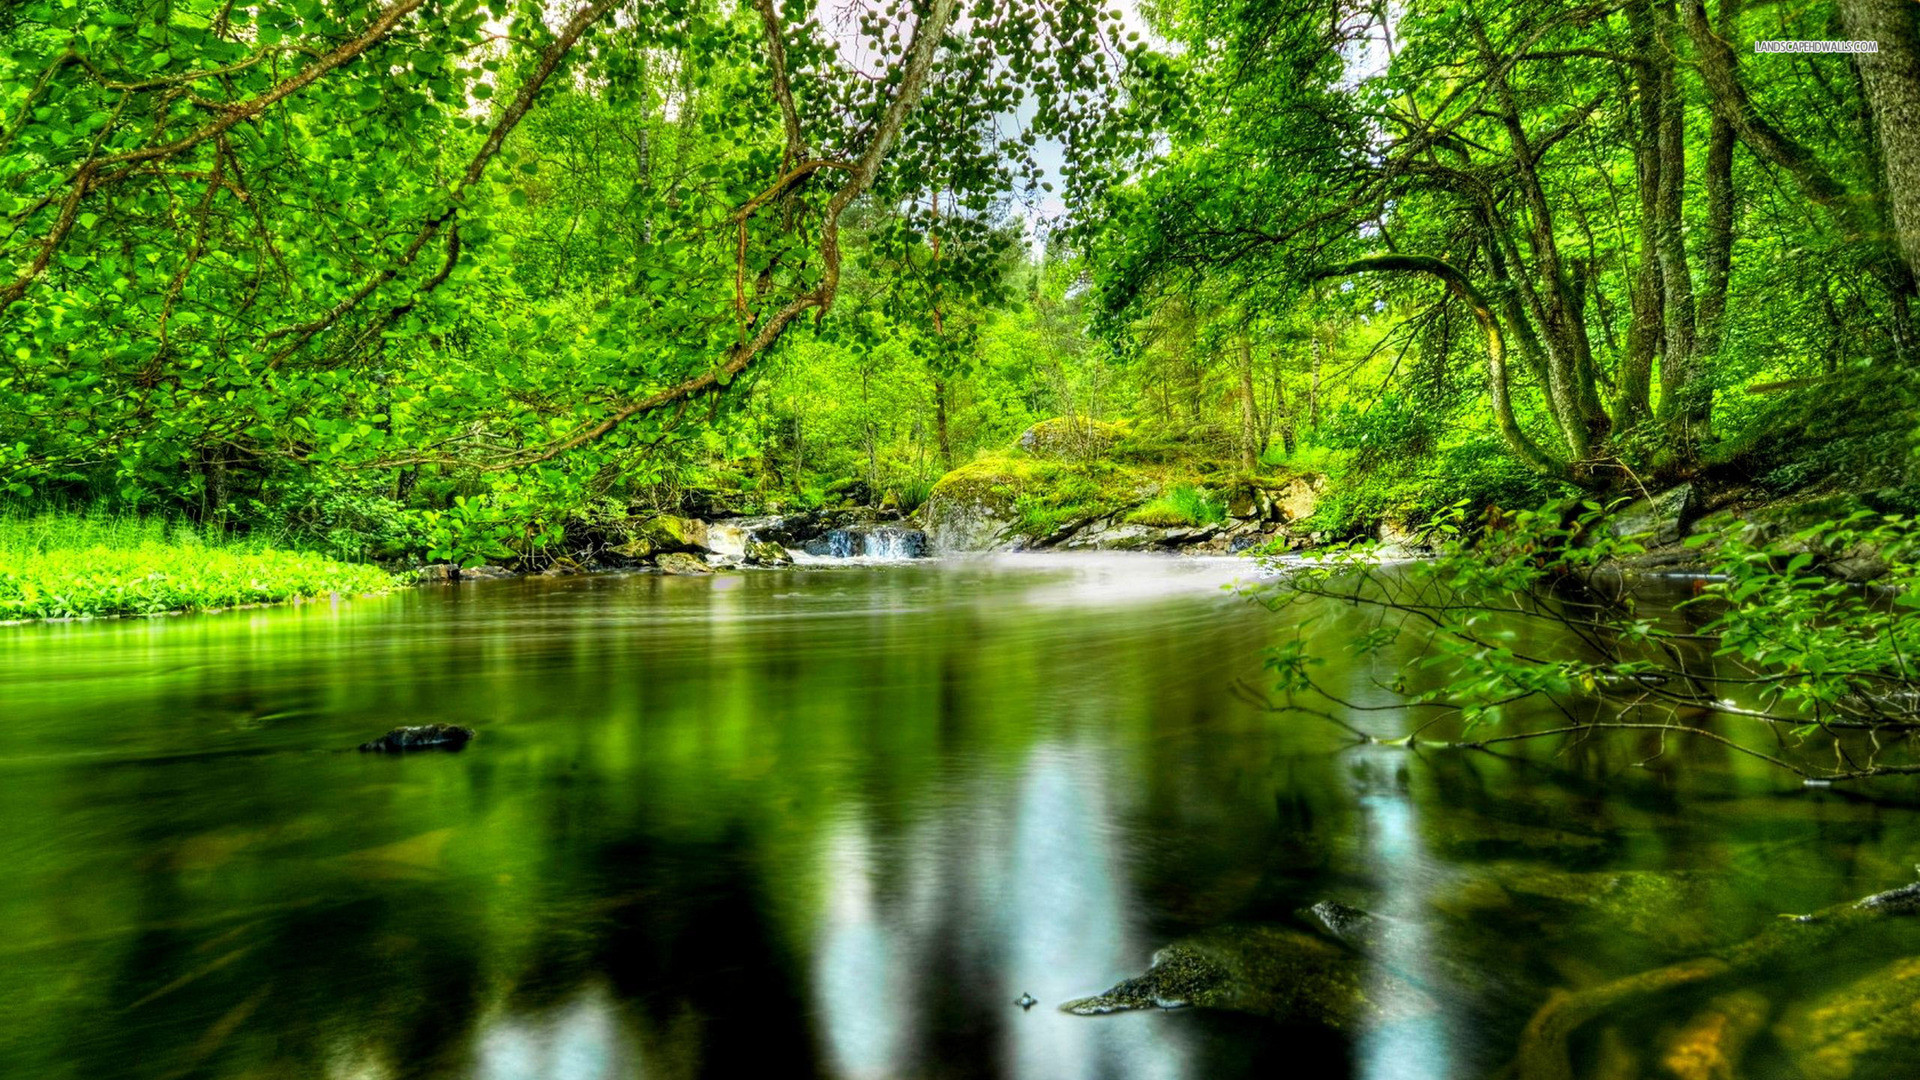 Hd forest river nature wallpapers 1920×1080 JPEG Image